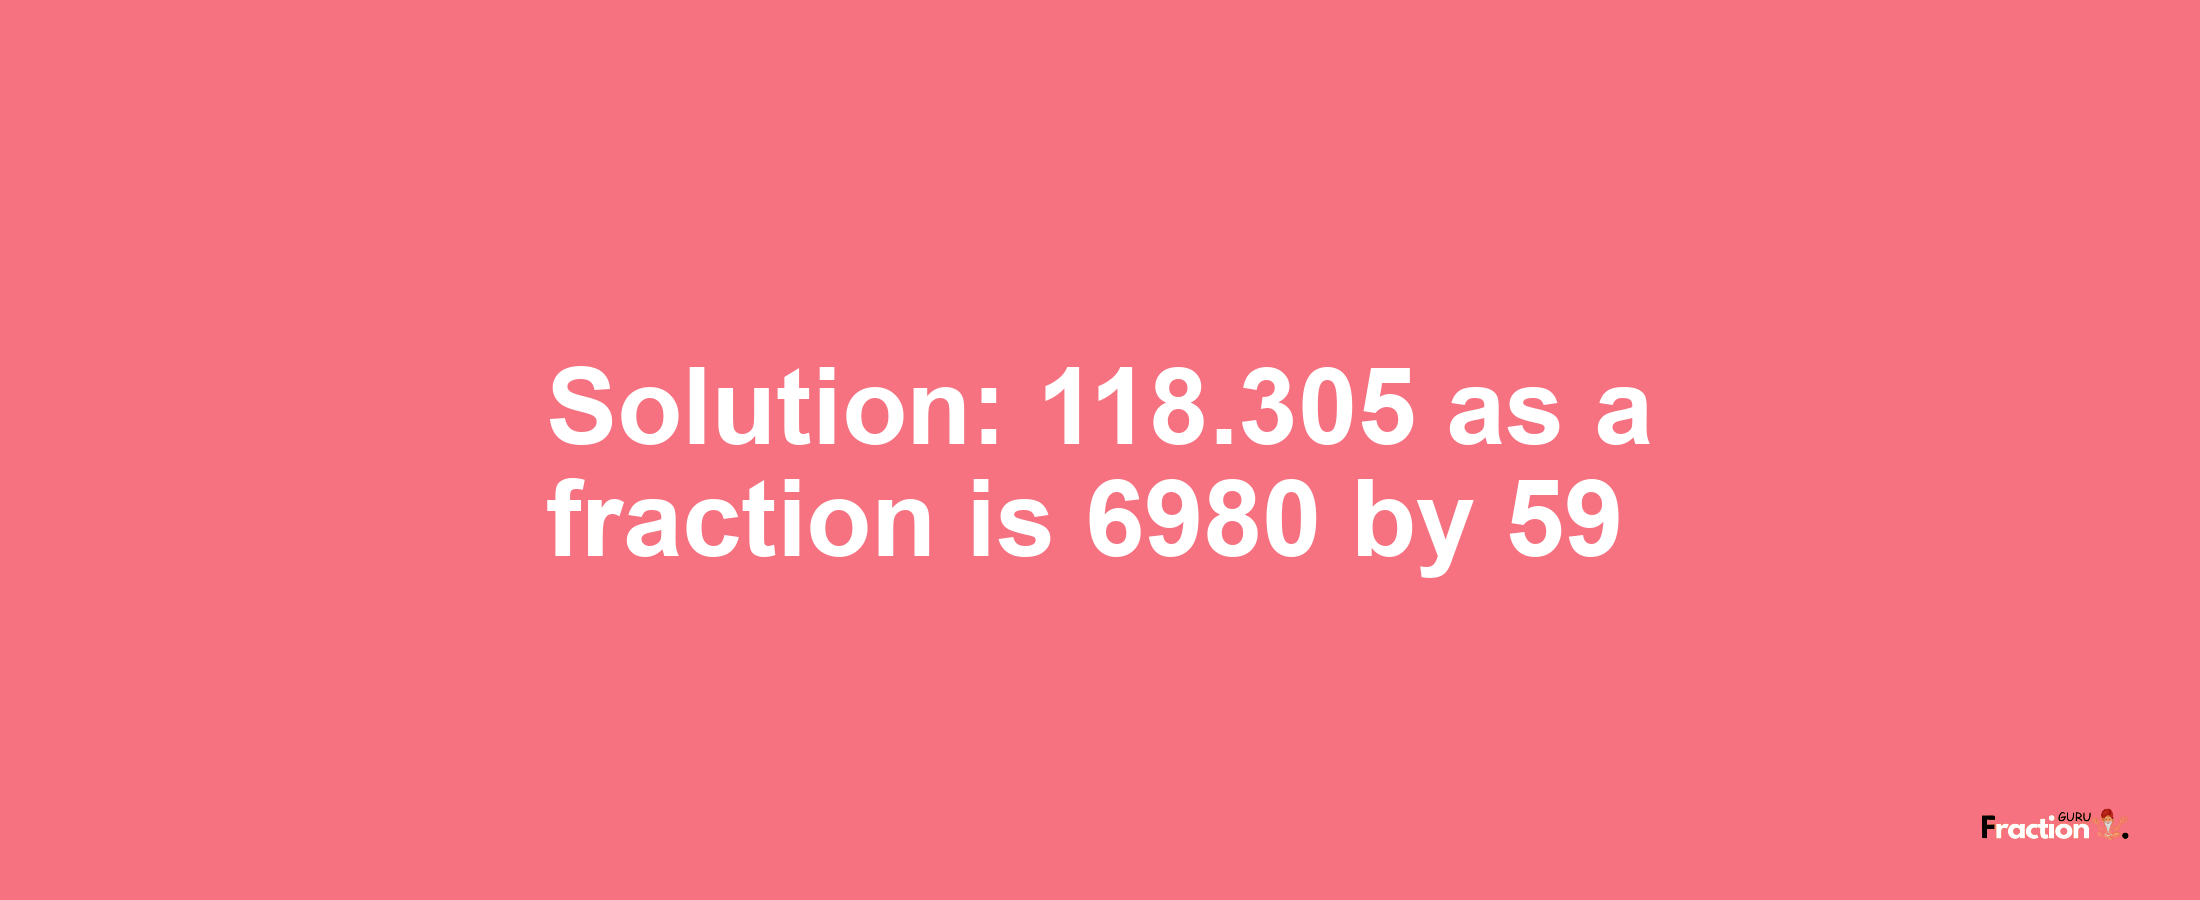 Solution:118.305 as a fraction is 6980/59